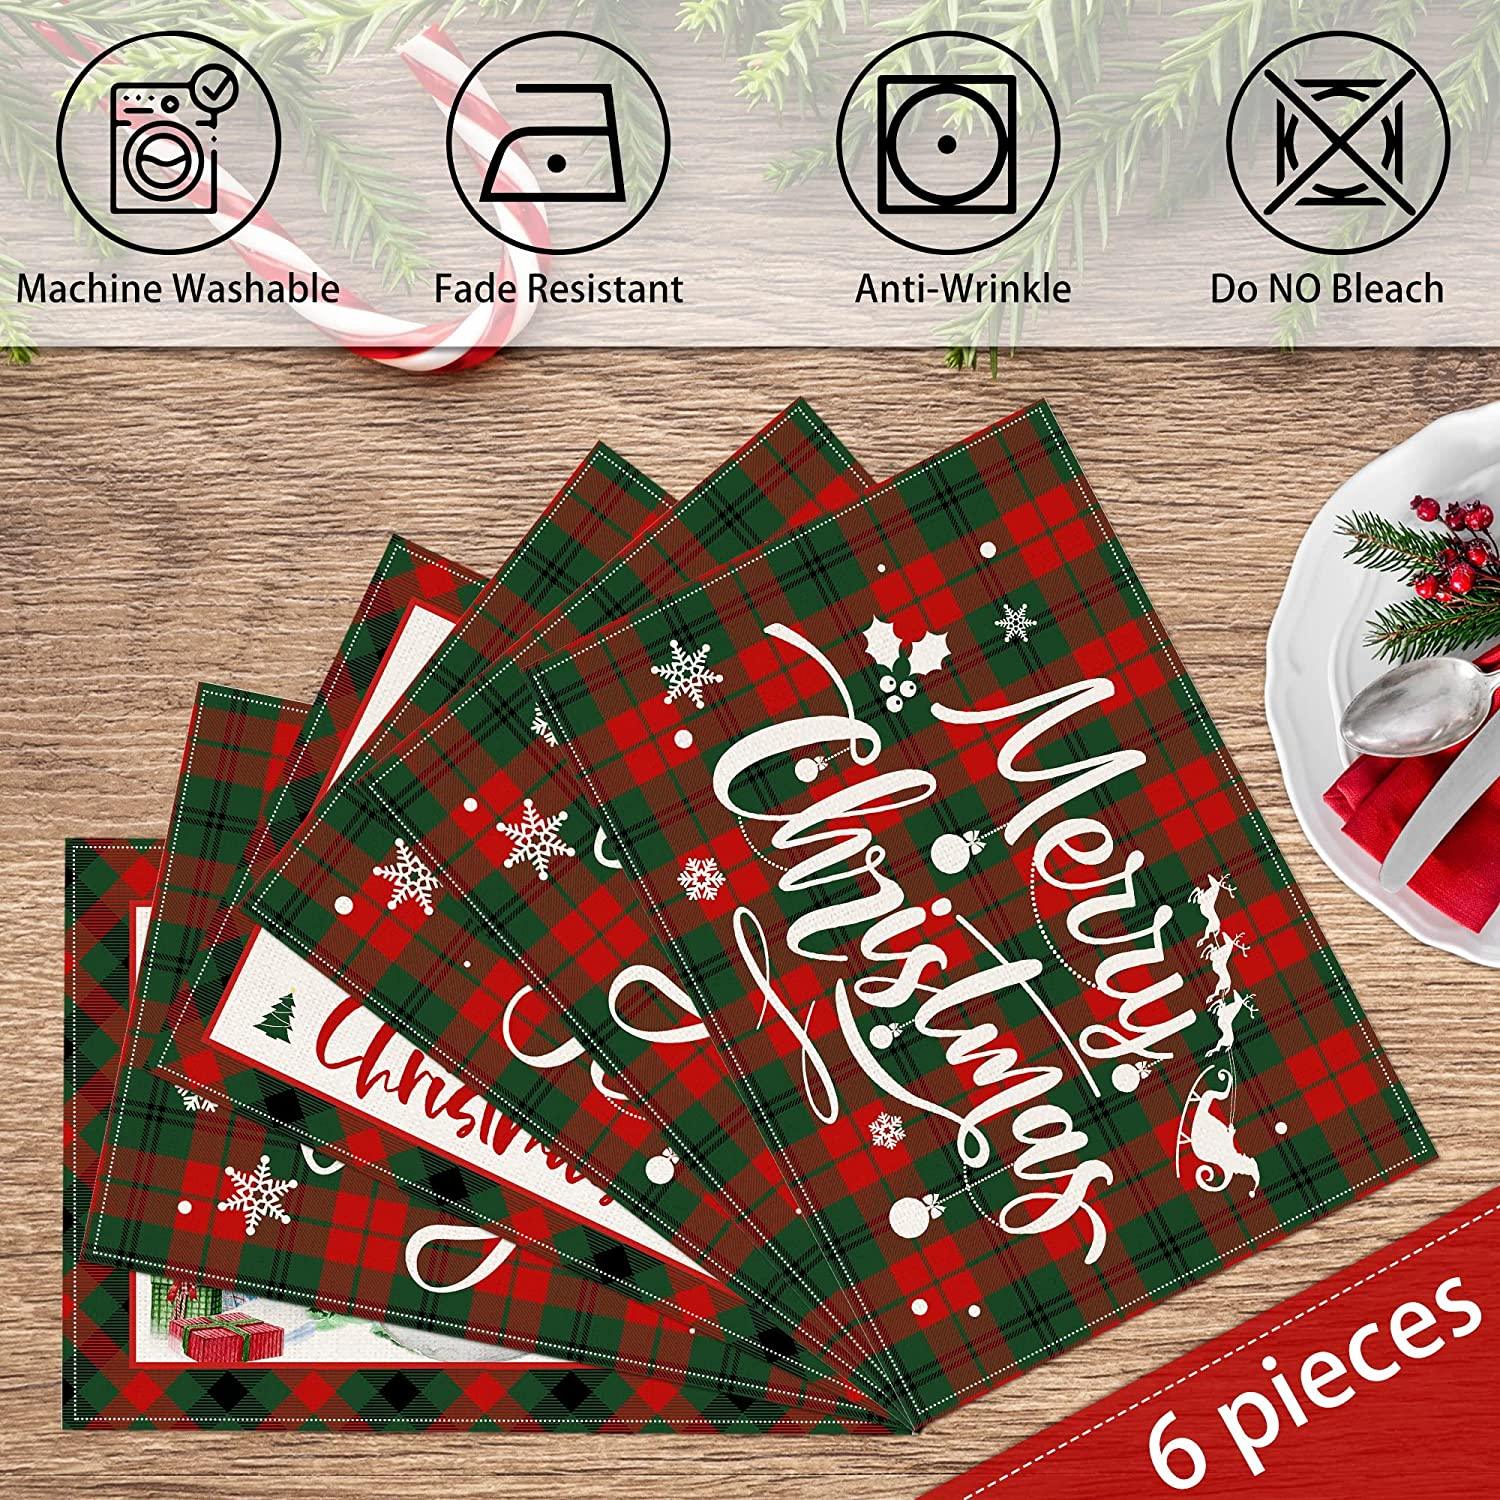 Christmas Placemats Set of 6 - Xmas Placemats - 12x18 Inch Winter Holiday Table Mats for Christmas Party Outdoor Home Kitchen Dining Decor - Decotree.co Online Shop